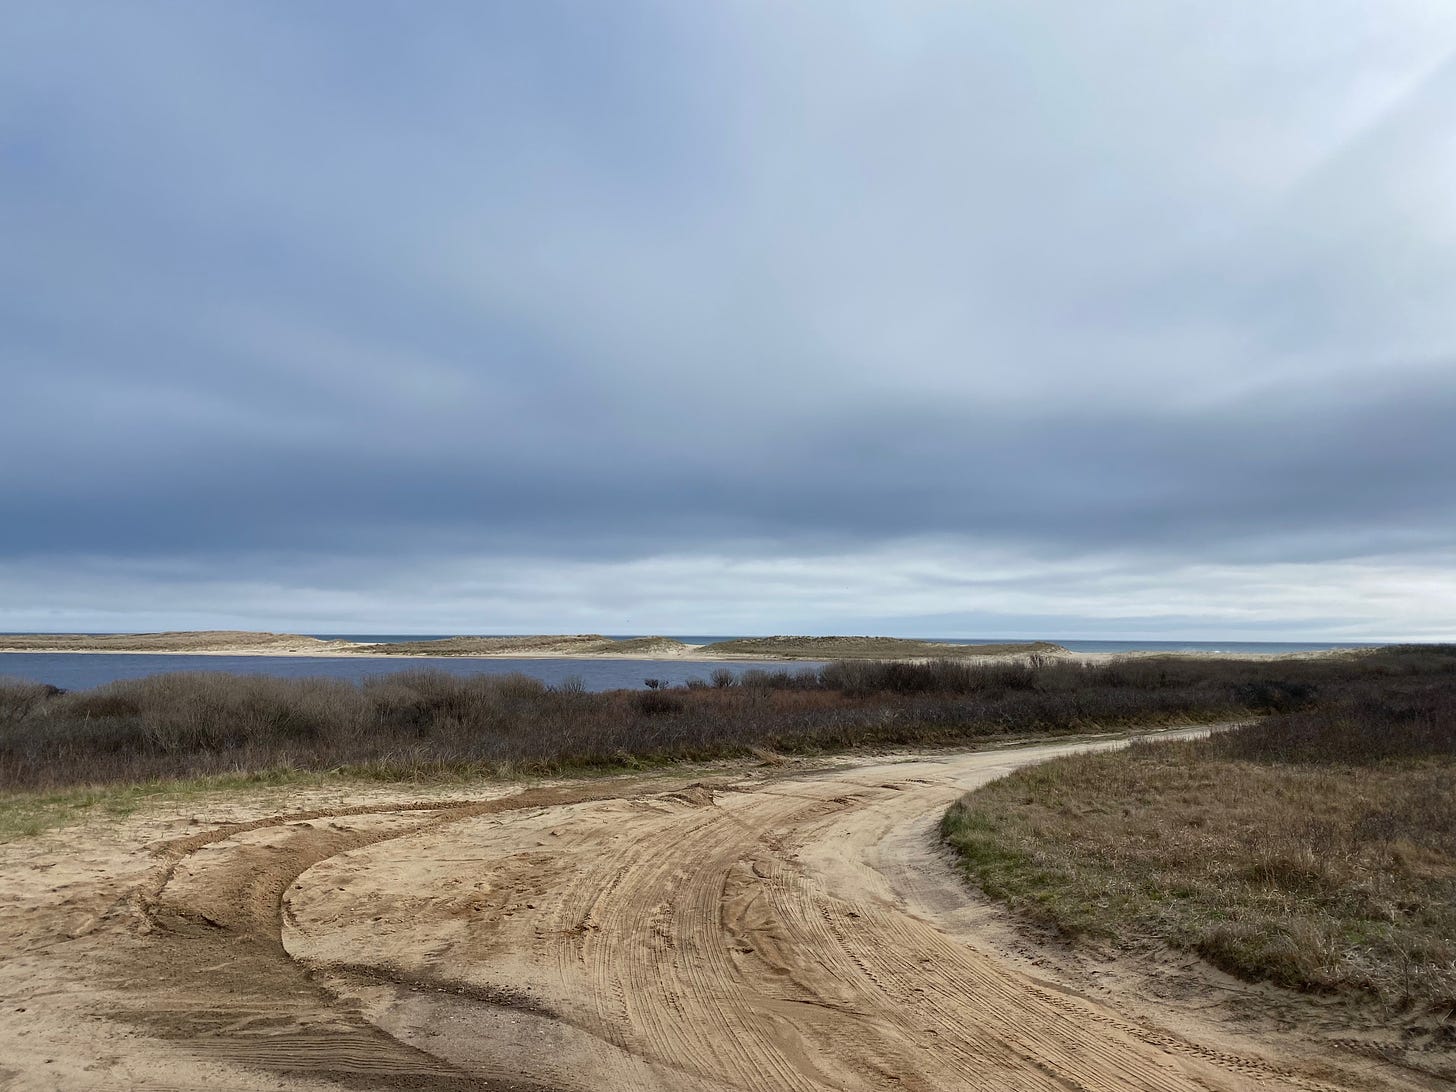 A dirt road under a dark cloudy sky curves around toward a pond and a line of dunes just beyond.